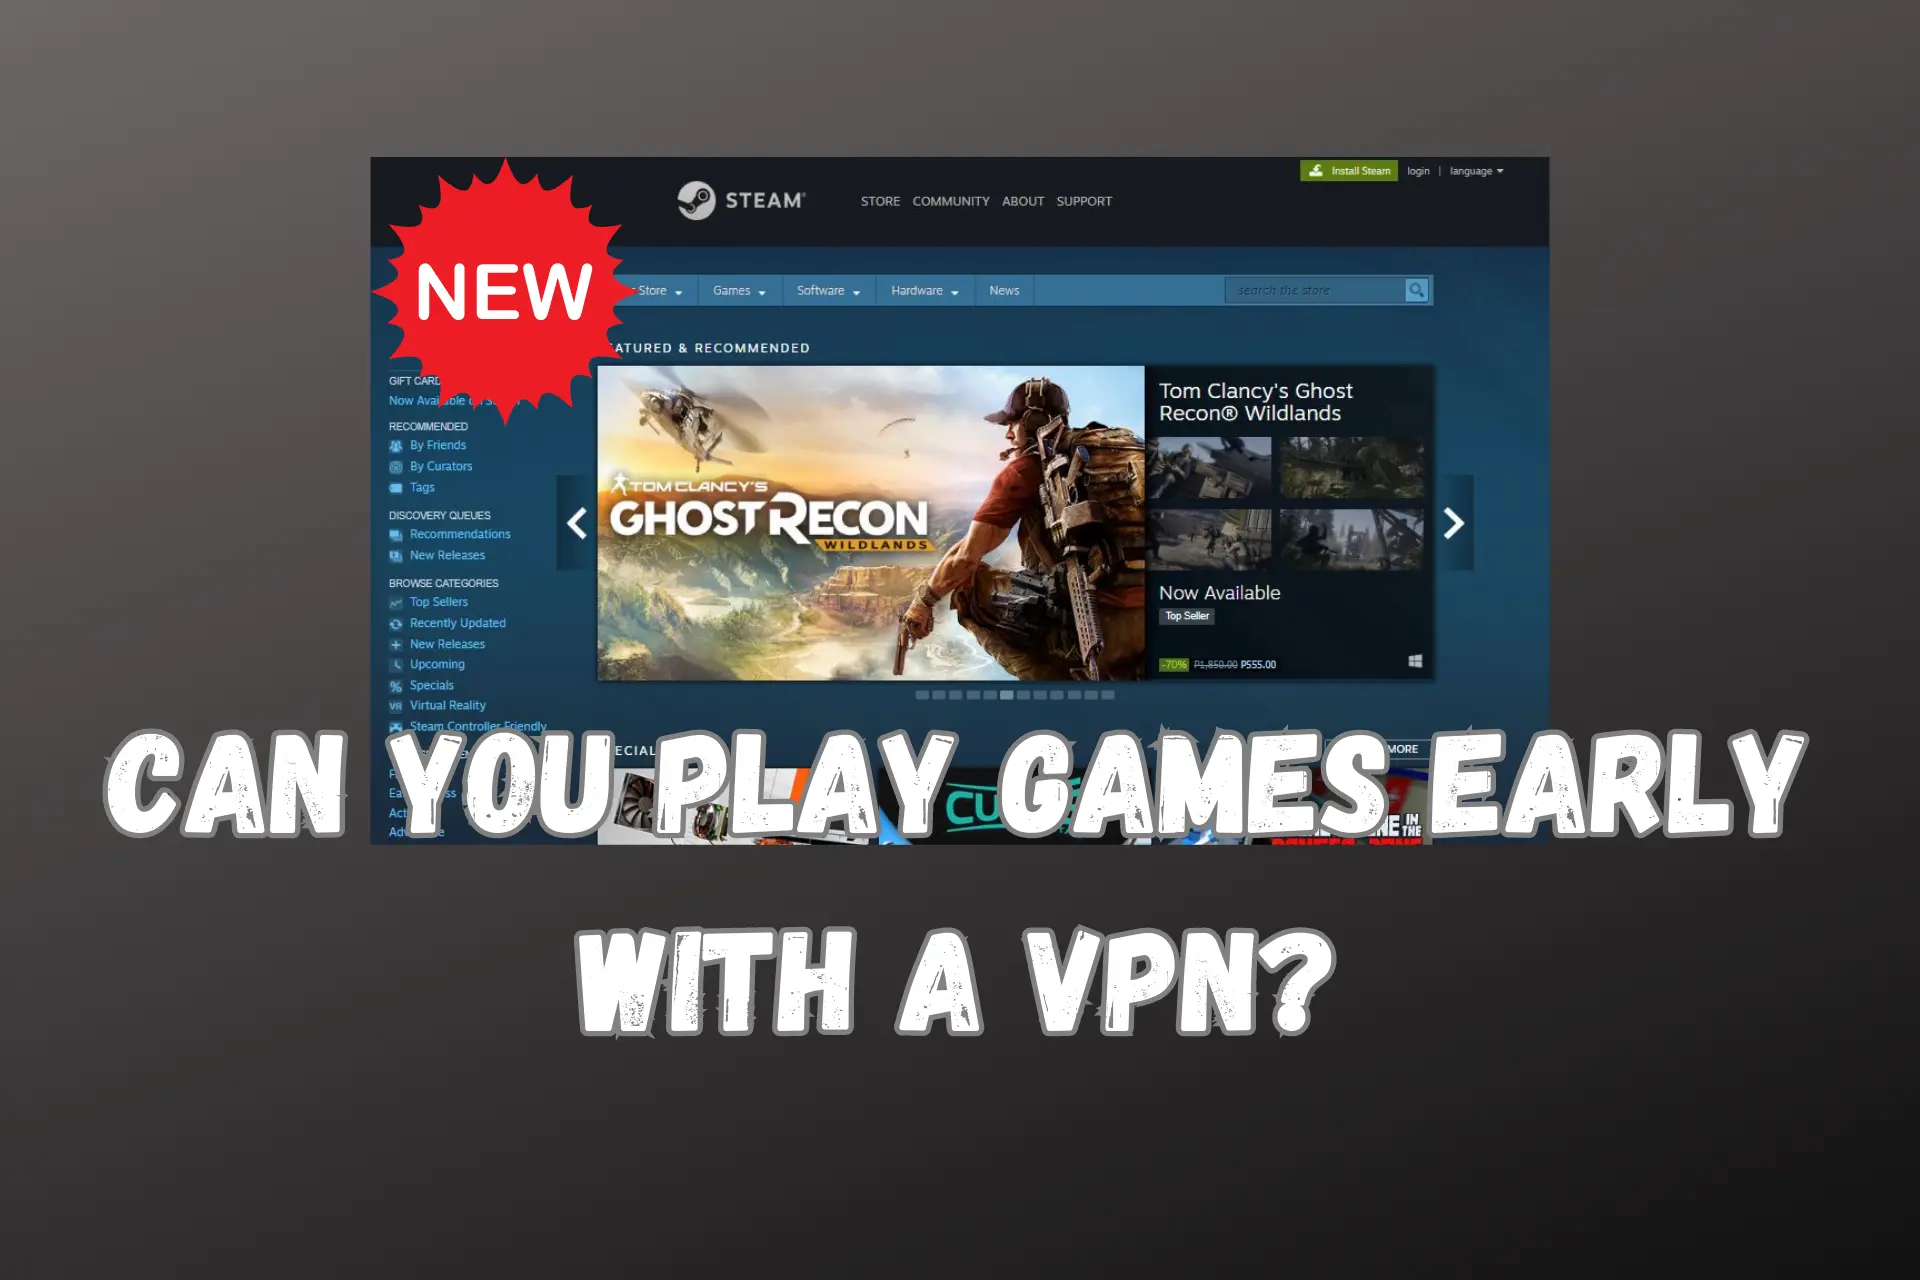 can you play games early with a vpn